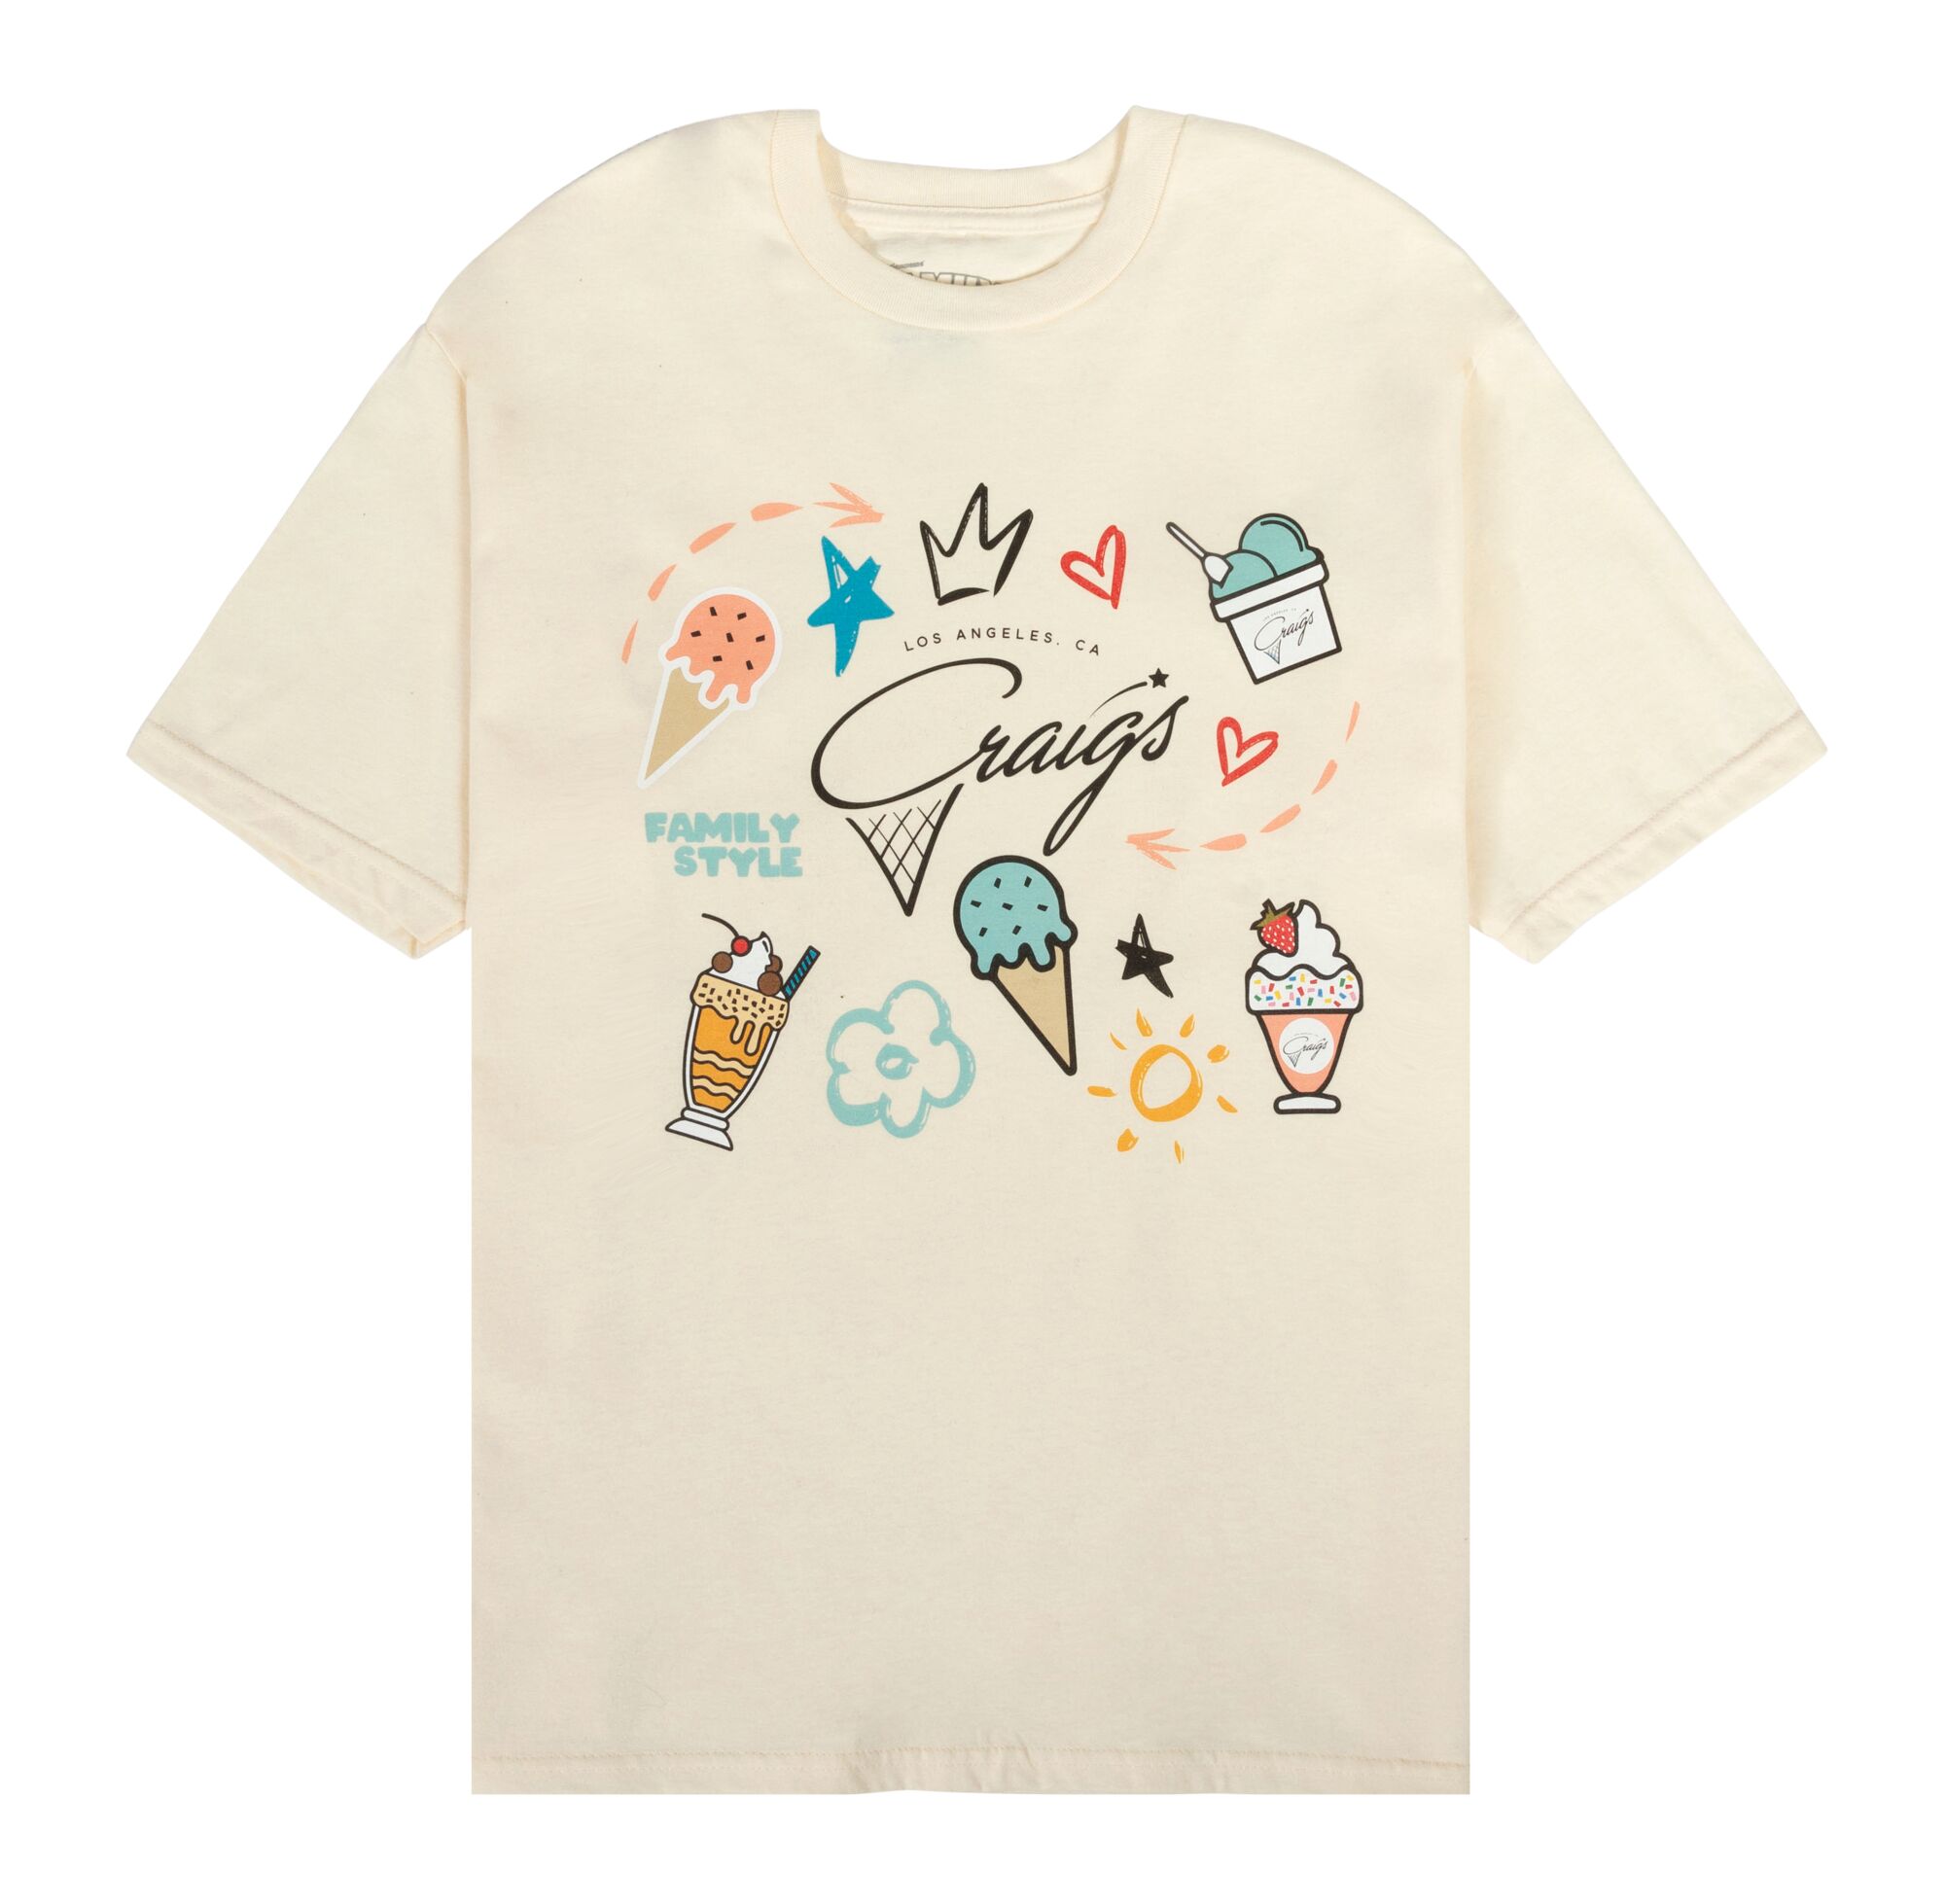 Whimsical cream-colored tee with drawings of ice creams